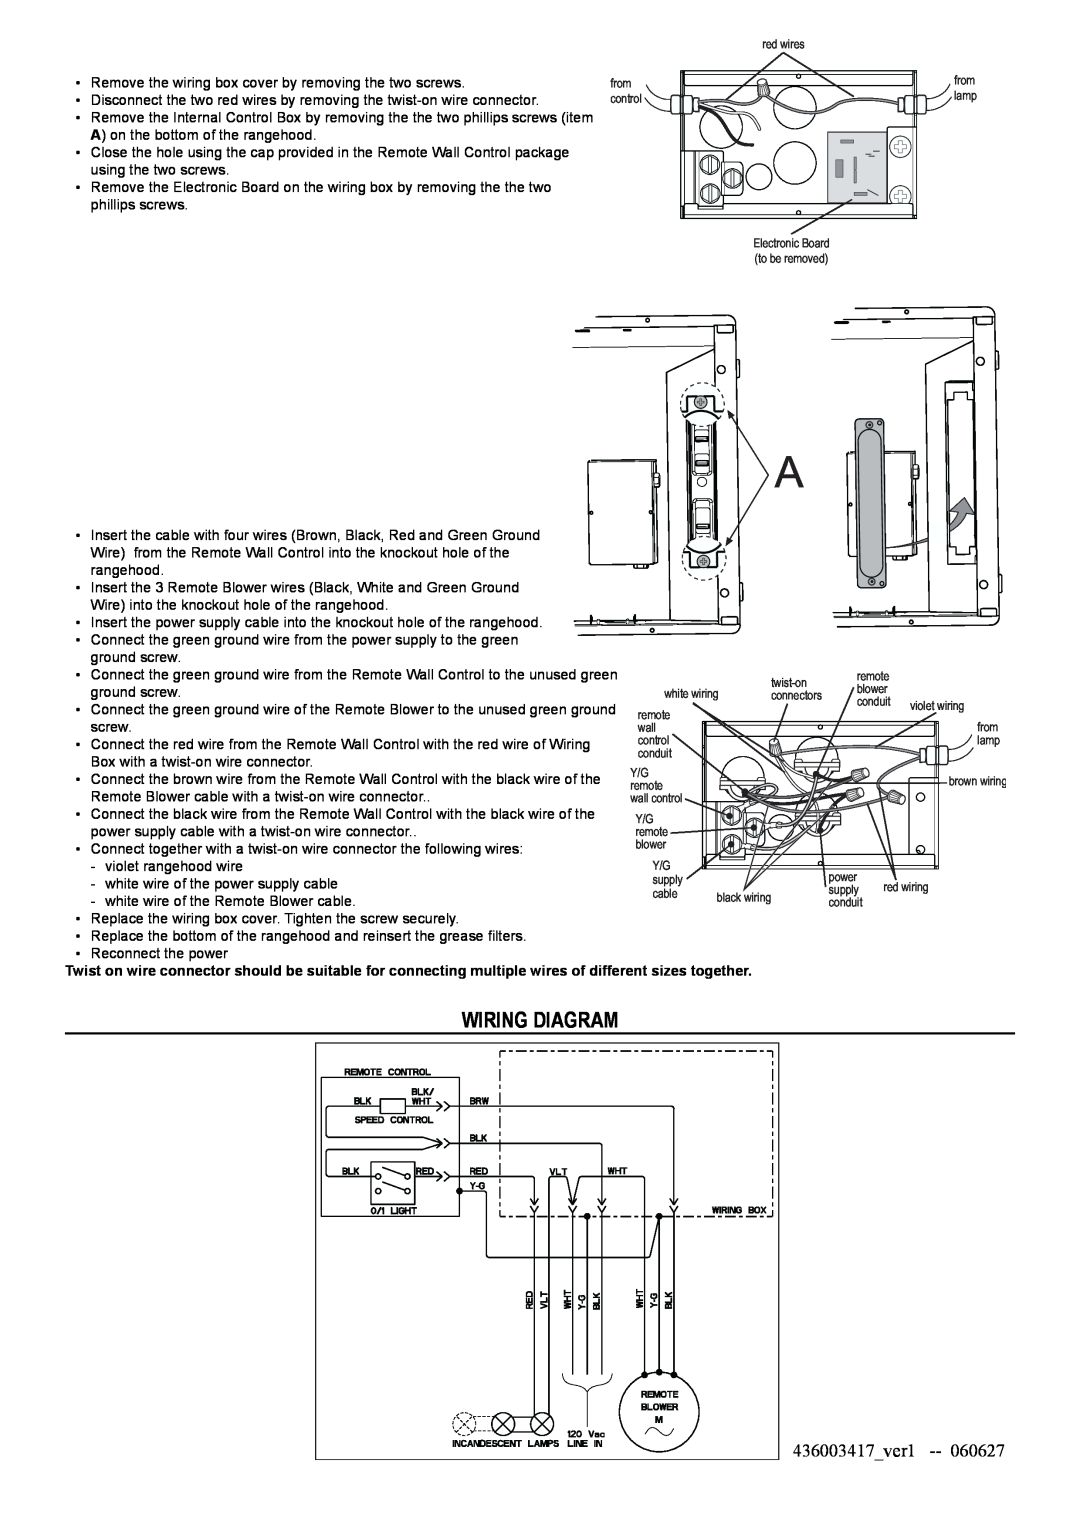 Faber INCA PRO 30 RB installation instructions Wiring Diagram, 436003417ver1 